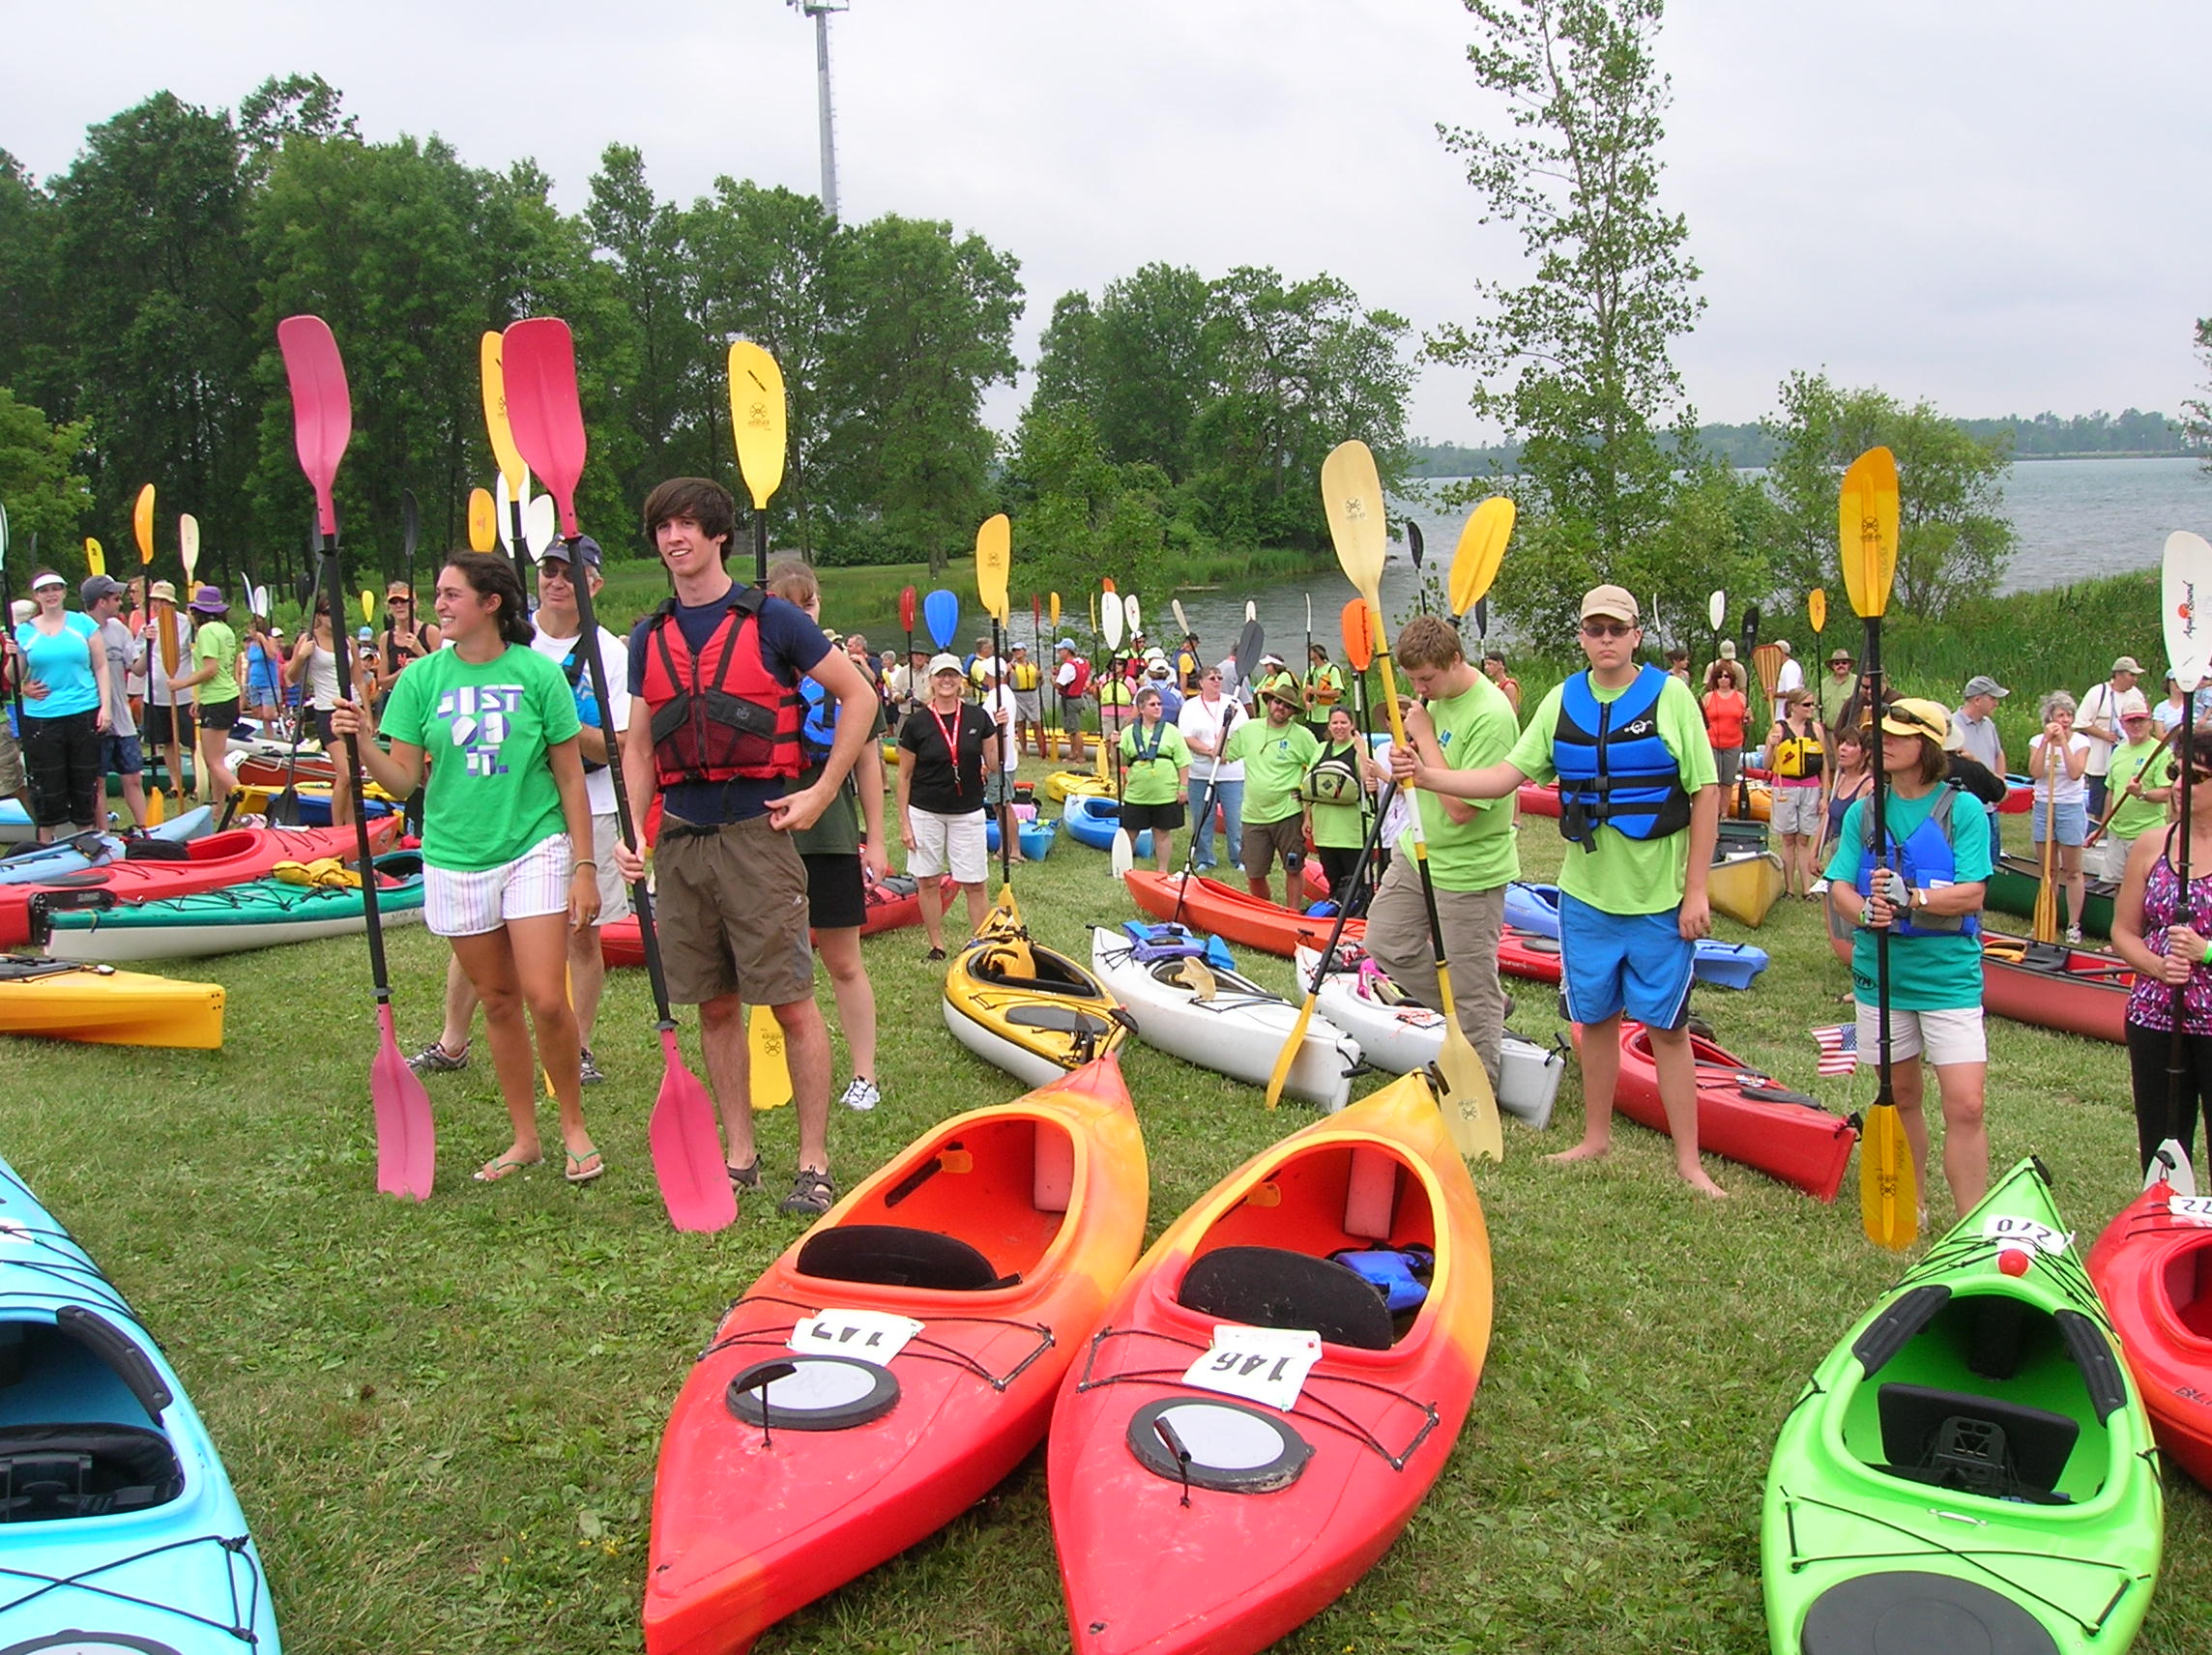 events are great places to recruit paddlers for the [http://www.cgauxed.org/paddle.htm Paddlesports America